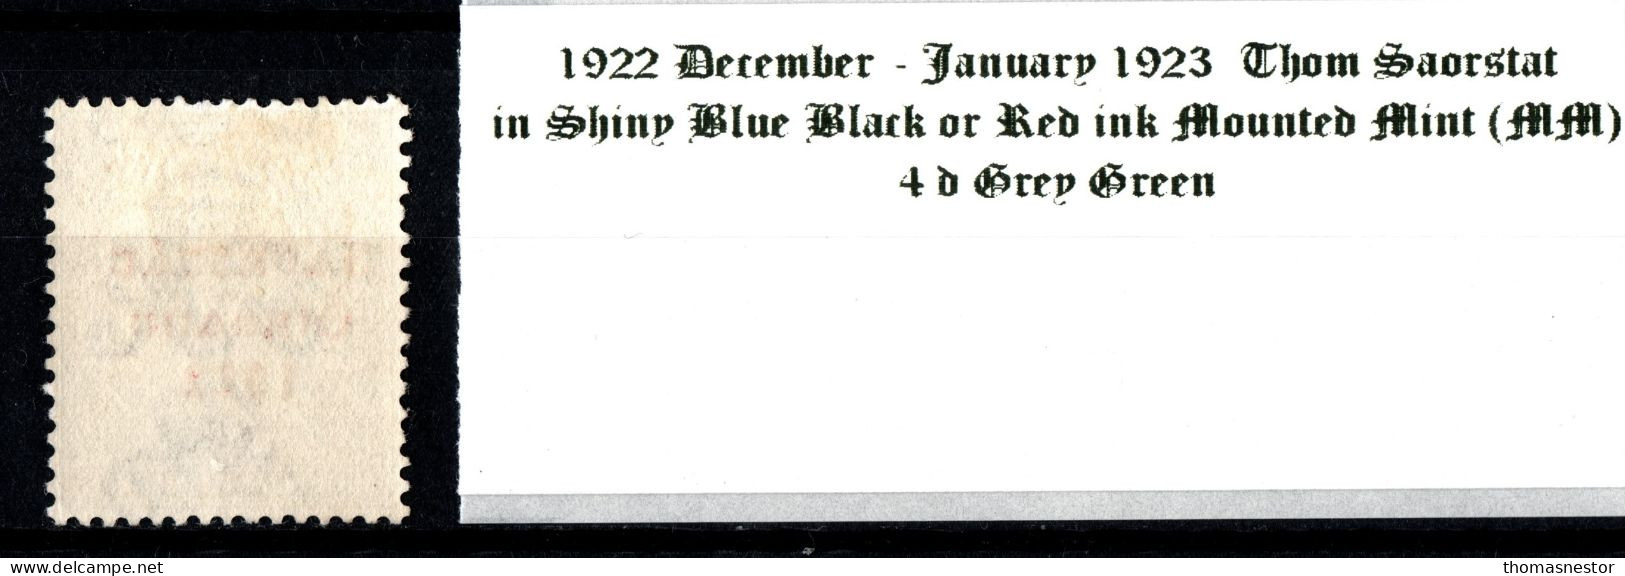 1922 - 1923 Dec-Jan Thom Saorstát In Shiny Blue Black Or Red Ink 4 D Grey Green (Red Overprint) Mounted Mint (MM) - Unused Stamps